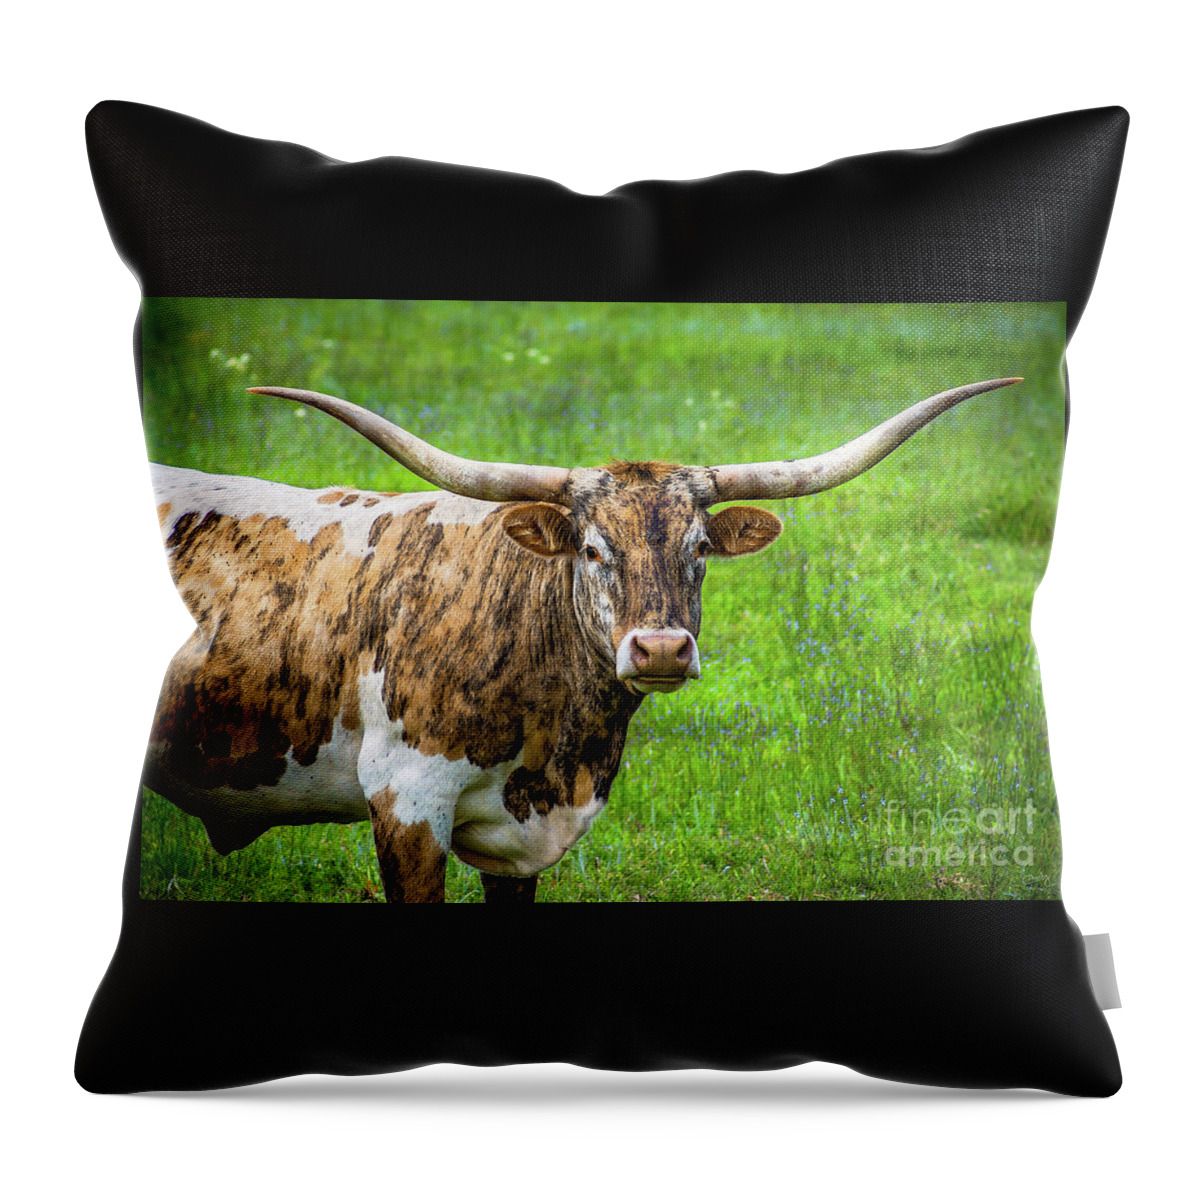 Texas Longhorn: Brindle And White Throw Pillow featuring the photograph Texas Longhorn by Imagery by Charly